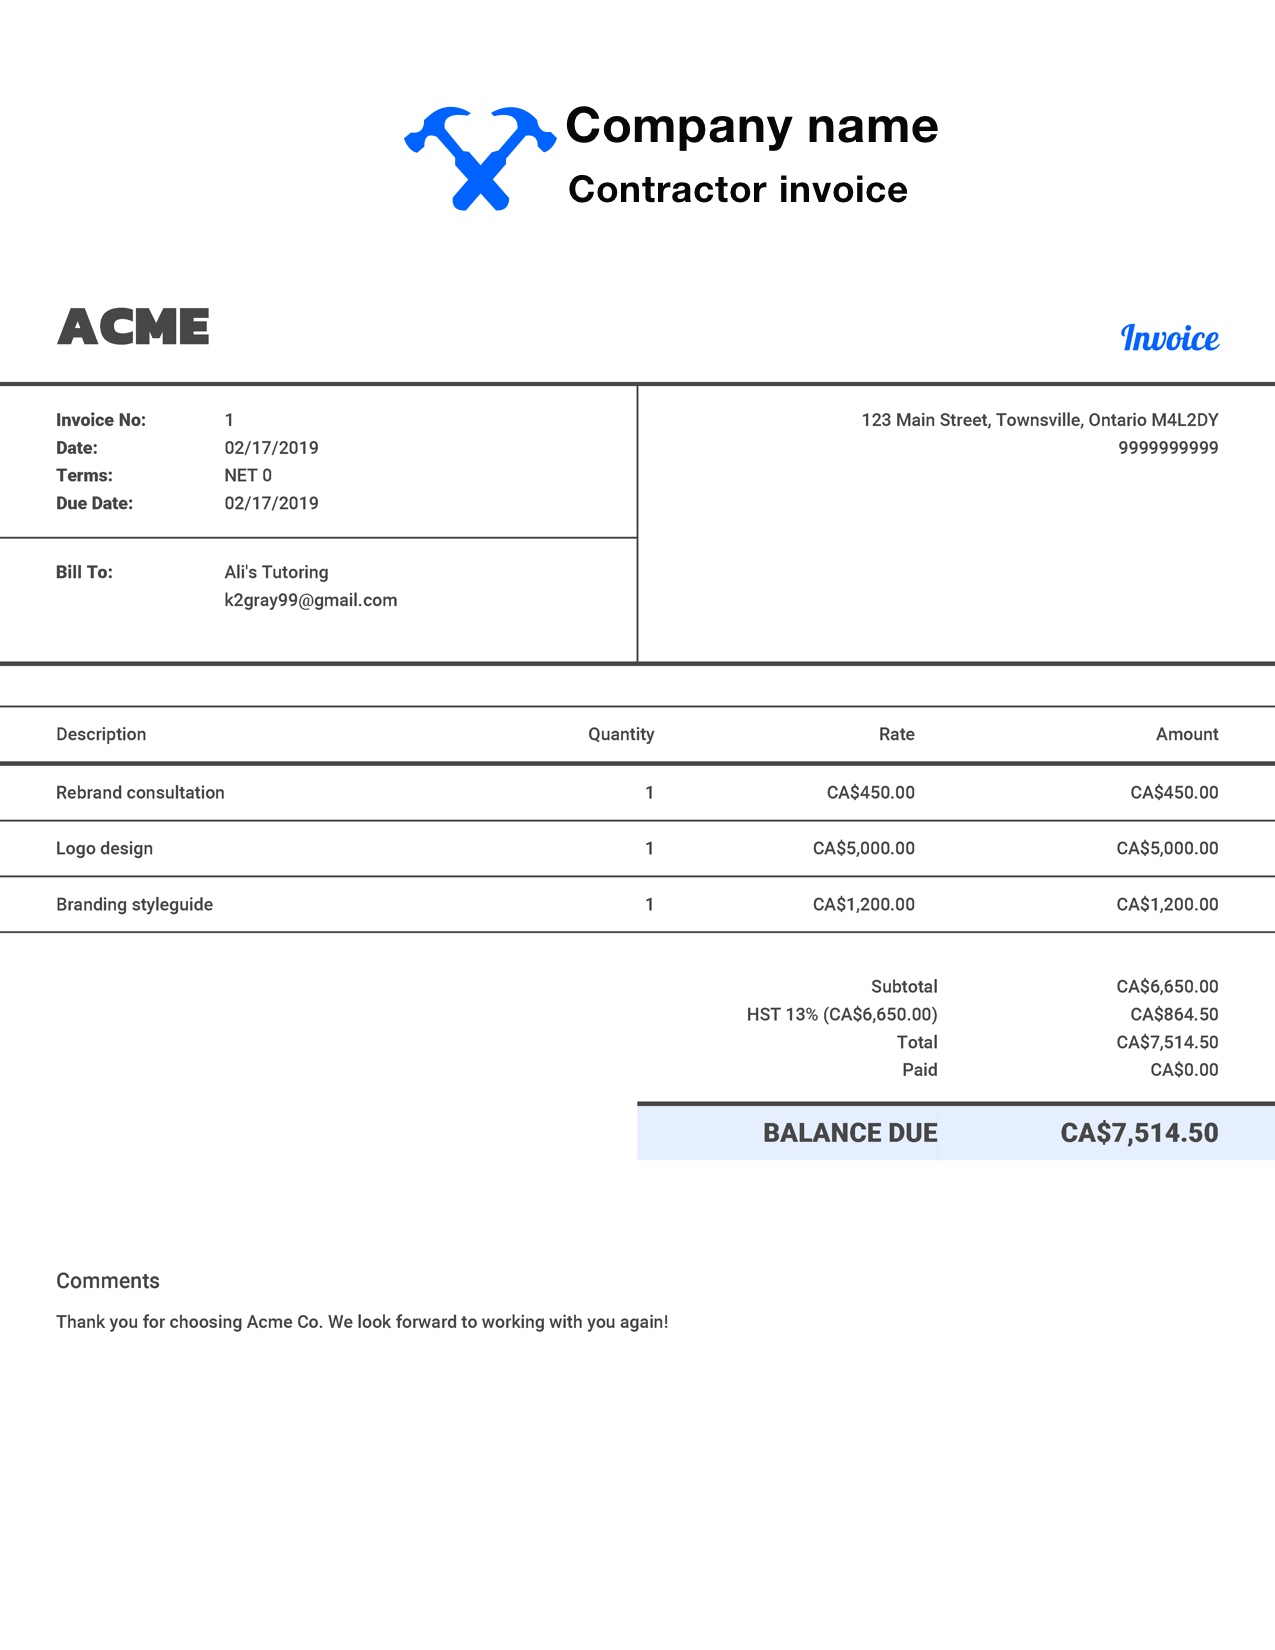 Free Contractor Invoice Template Customize and Send in 90 Seconds